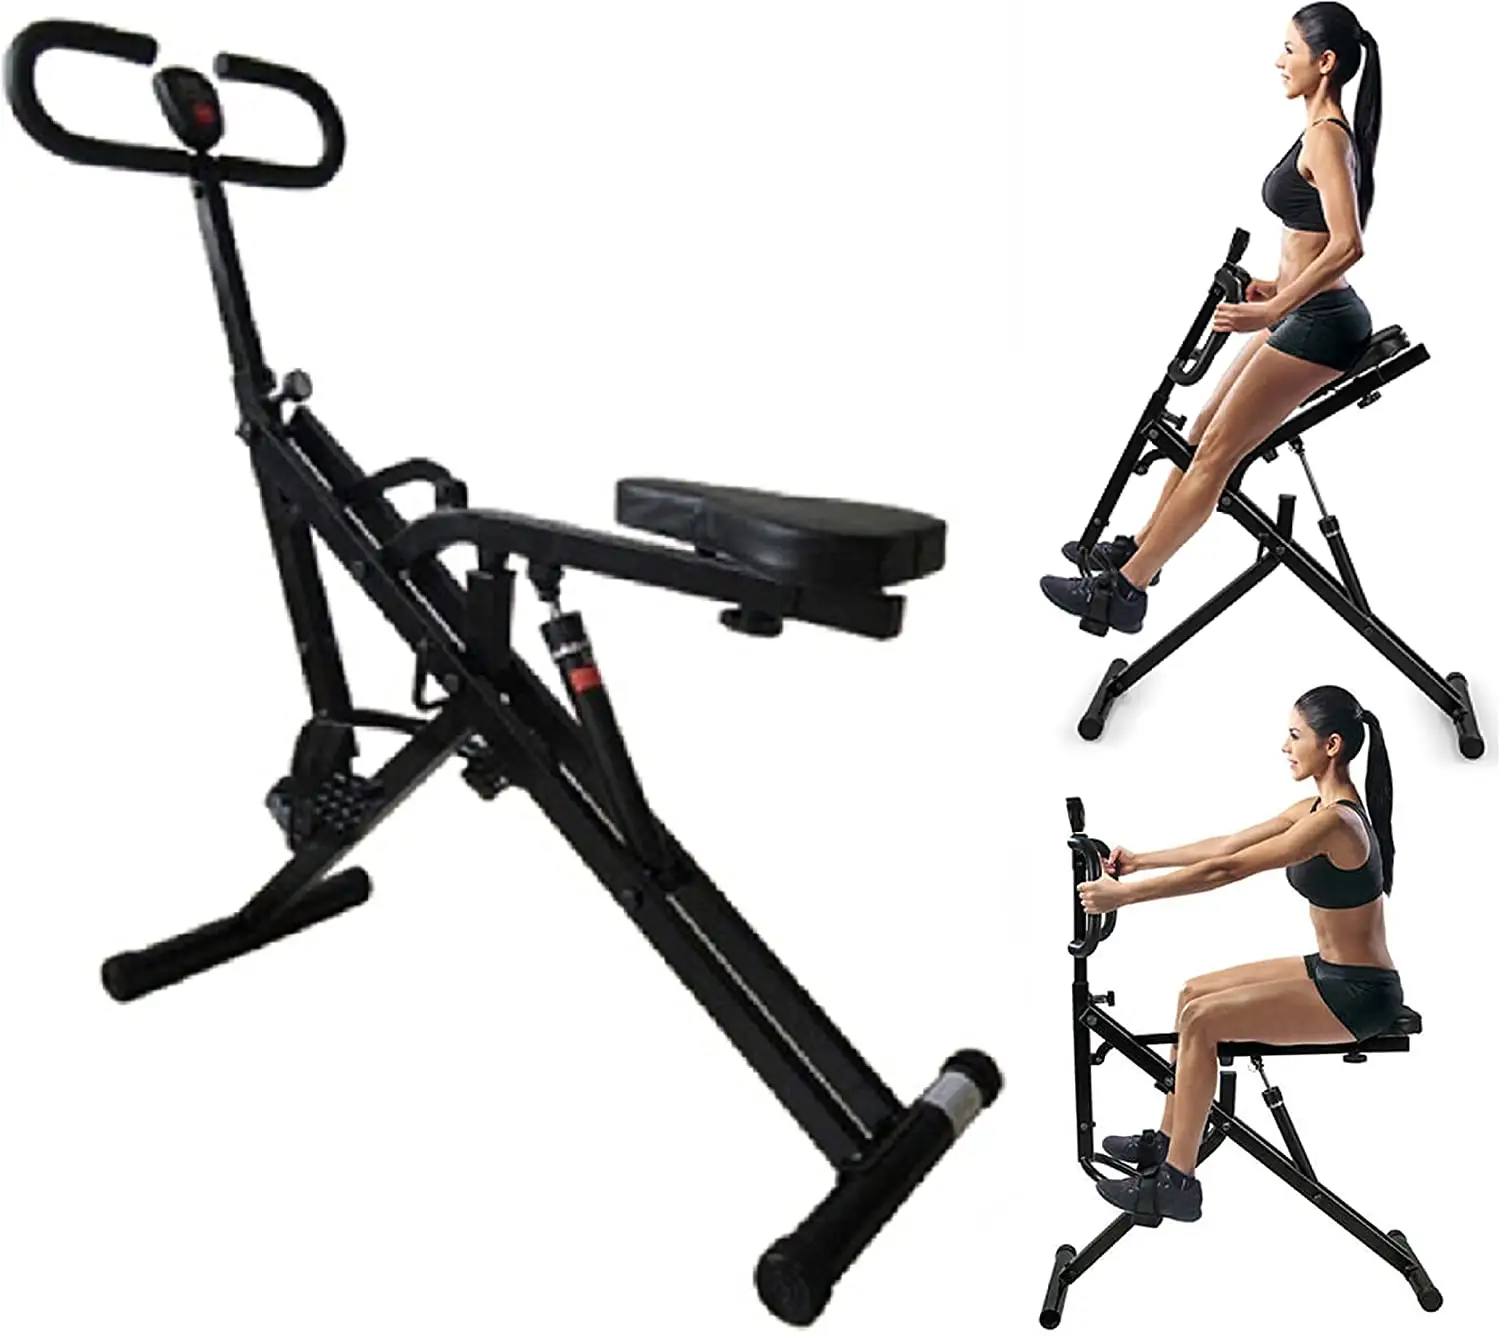 Factory hot selling custom LOGO total crunch rider bodybuilding exercise horse riding machine